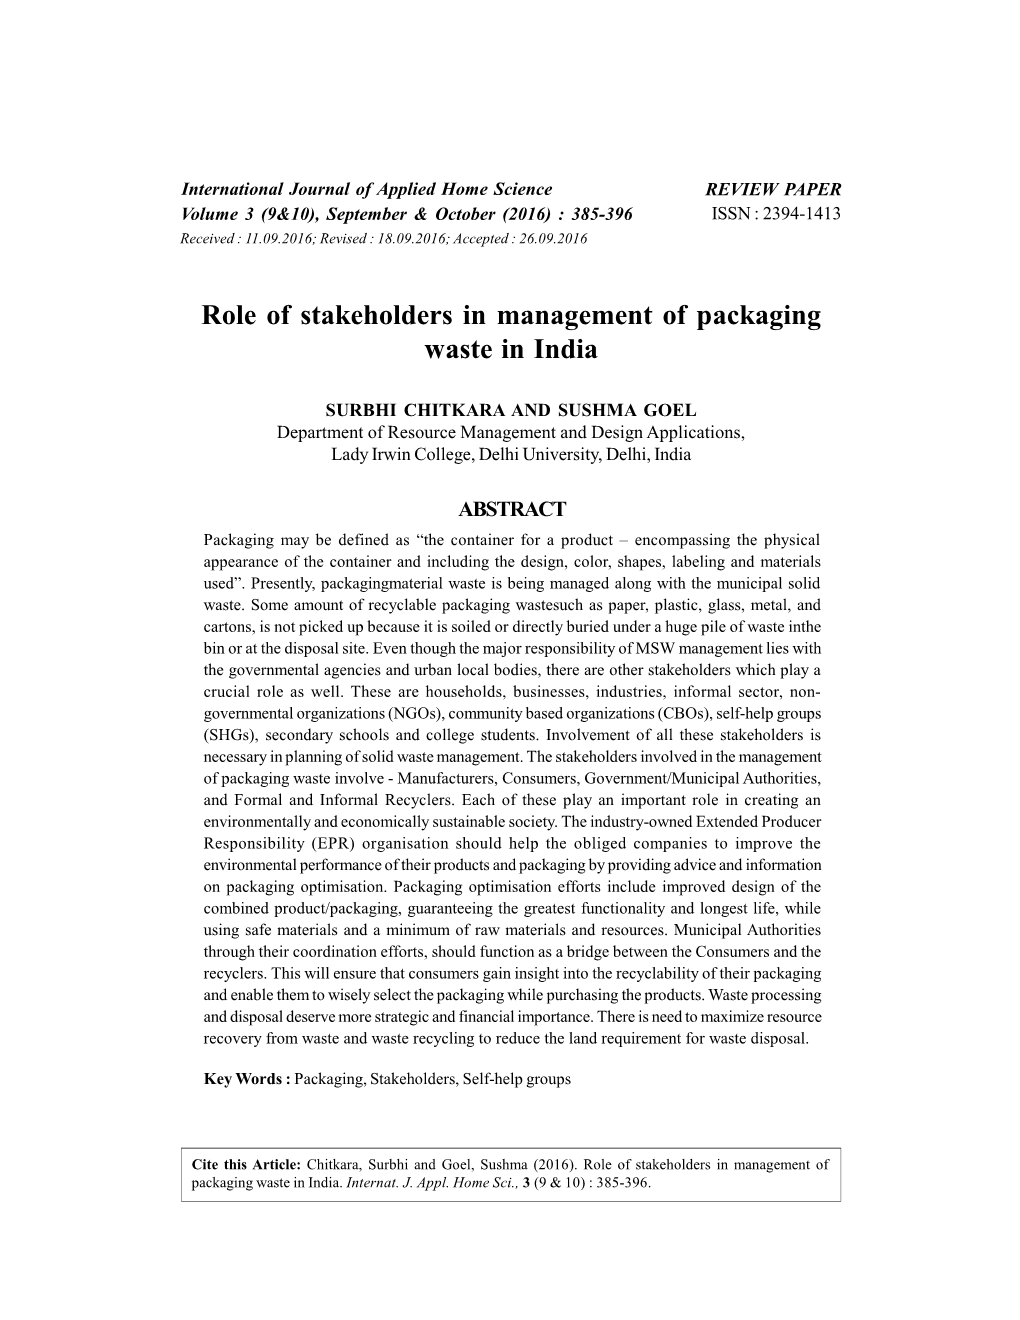 Role of Stakeholders in Management of Packaging Waste in India